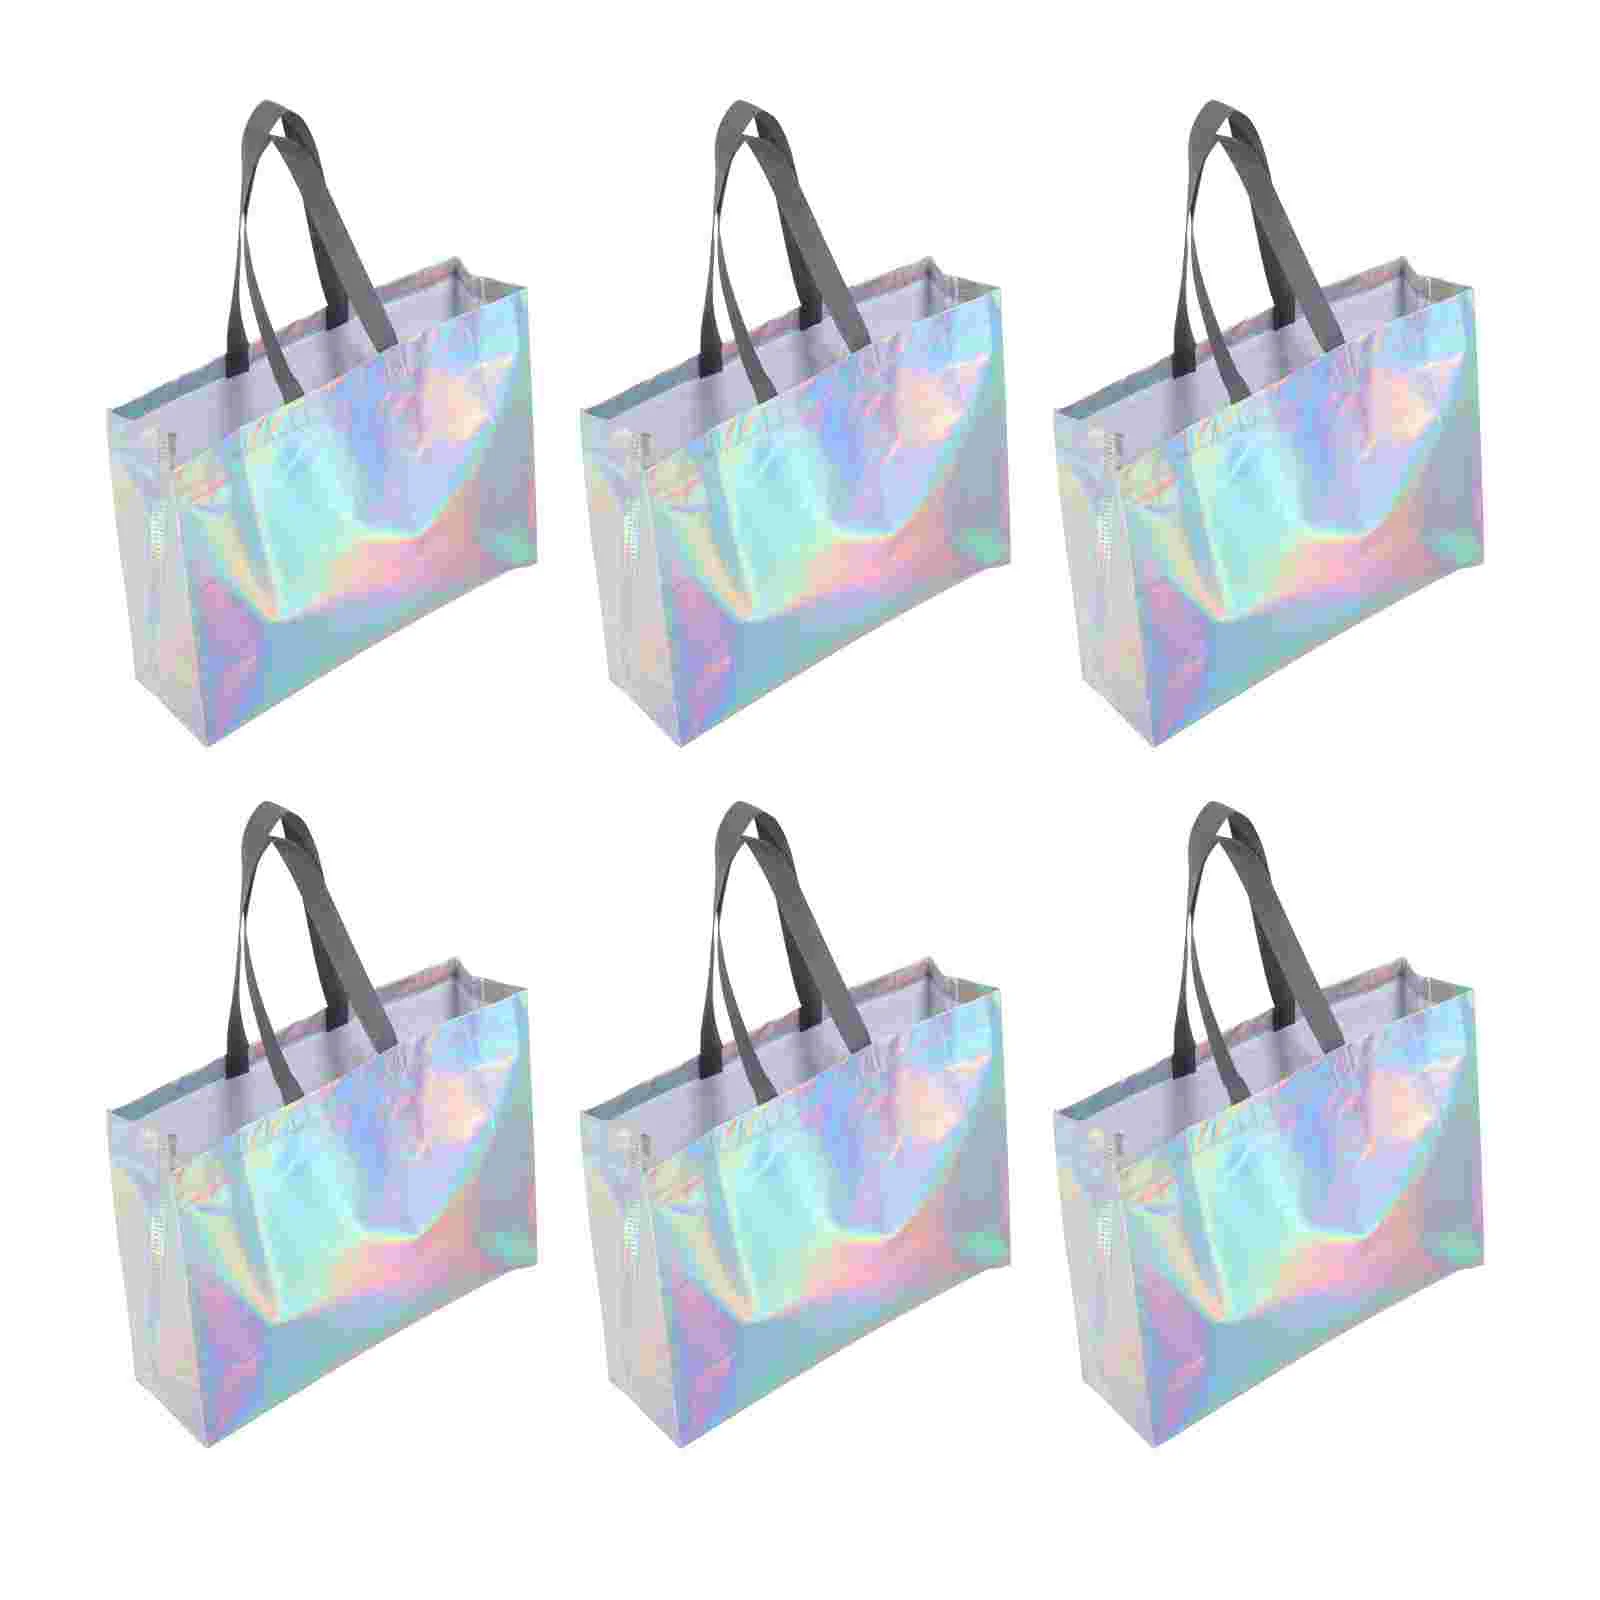 

Bag Gift Tote Reusable Party Grocery Holographic Iridescent Shopping Candy Wrapping Non Wovenpackaging Silver Pouch Favor Treat